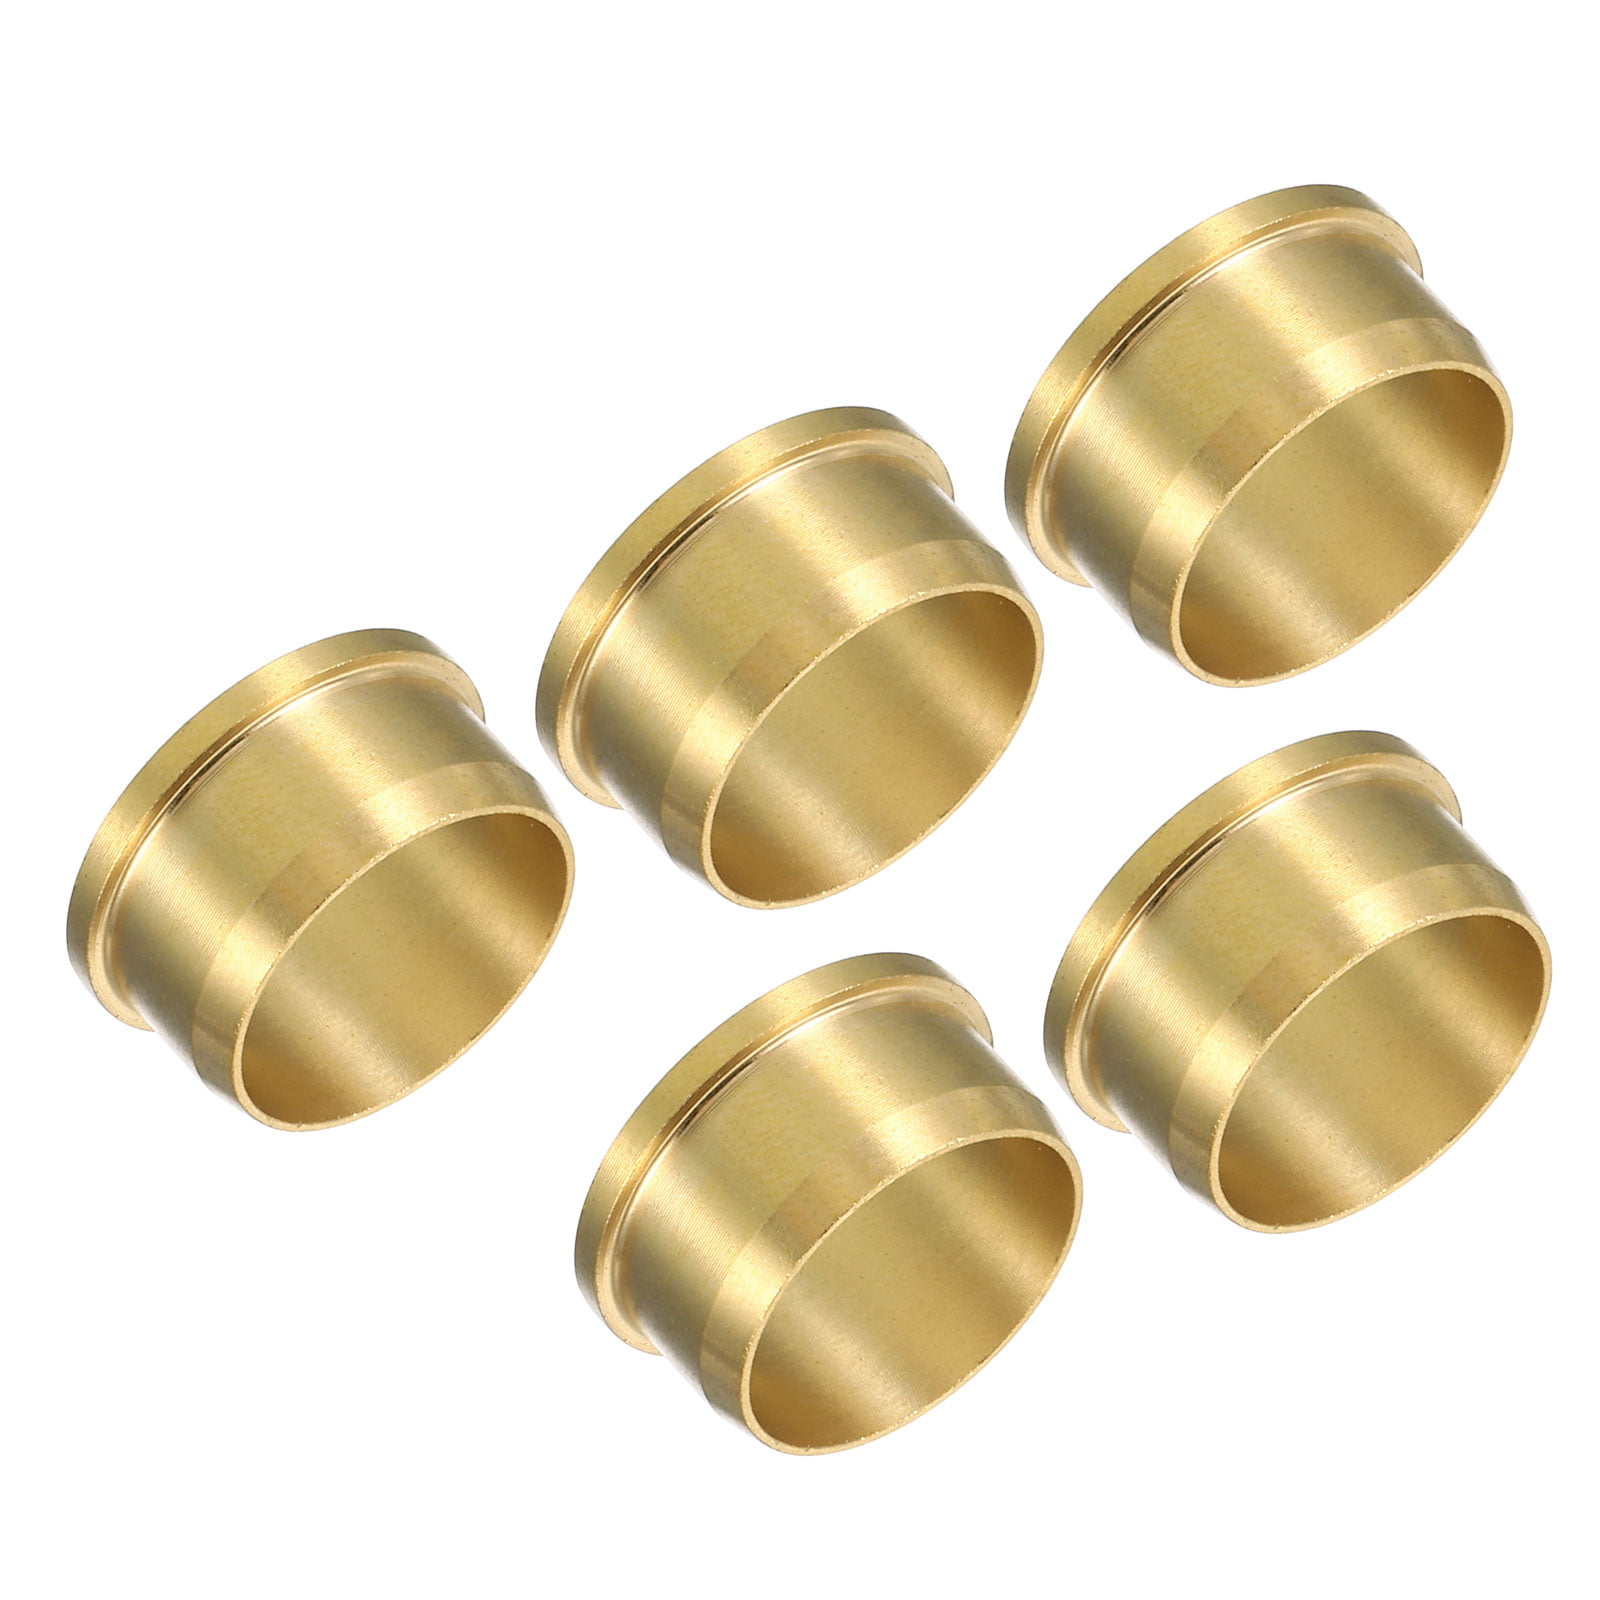 Uxcell 9mm Tube OD Brass Compression Sleeves Ferrules Brass Ferrule Fitting  30 Pack